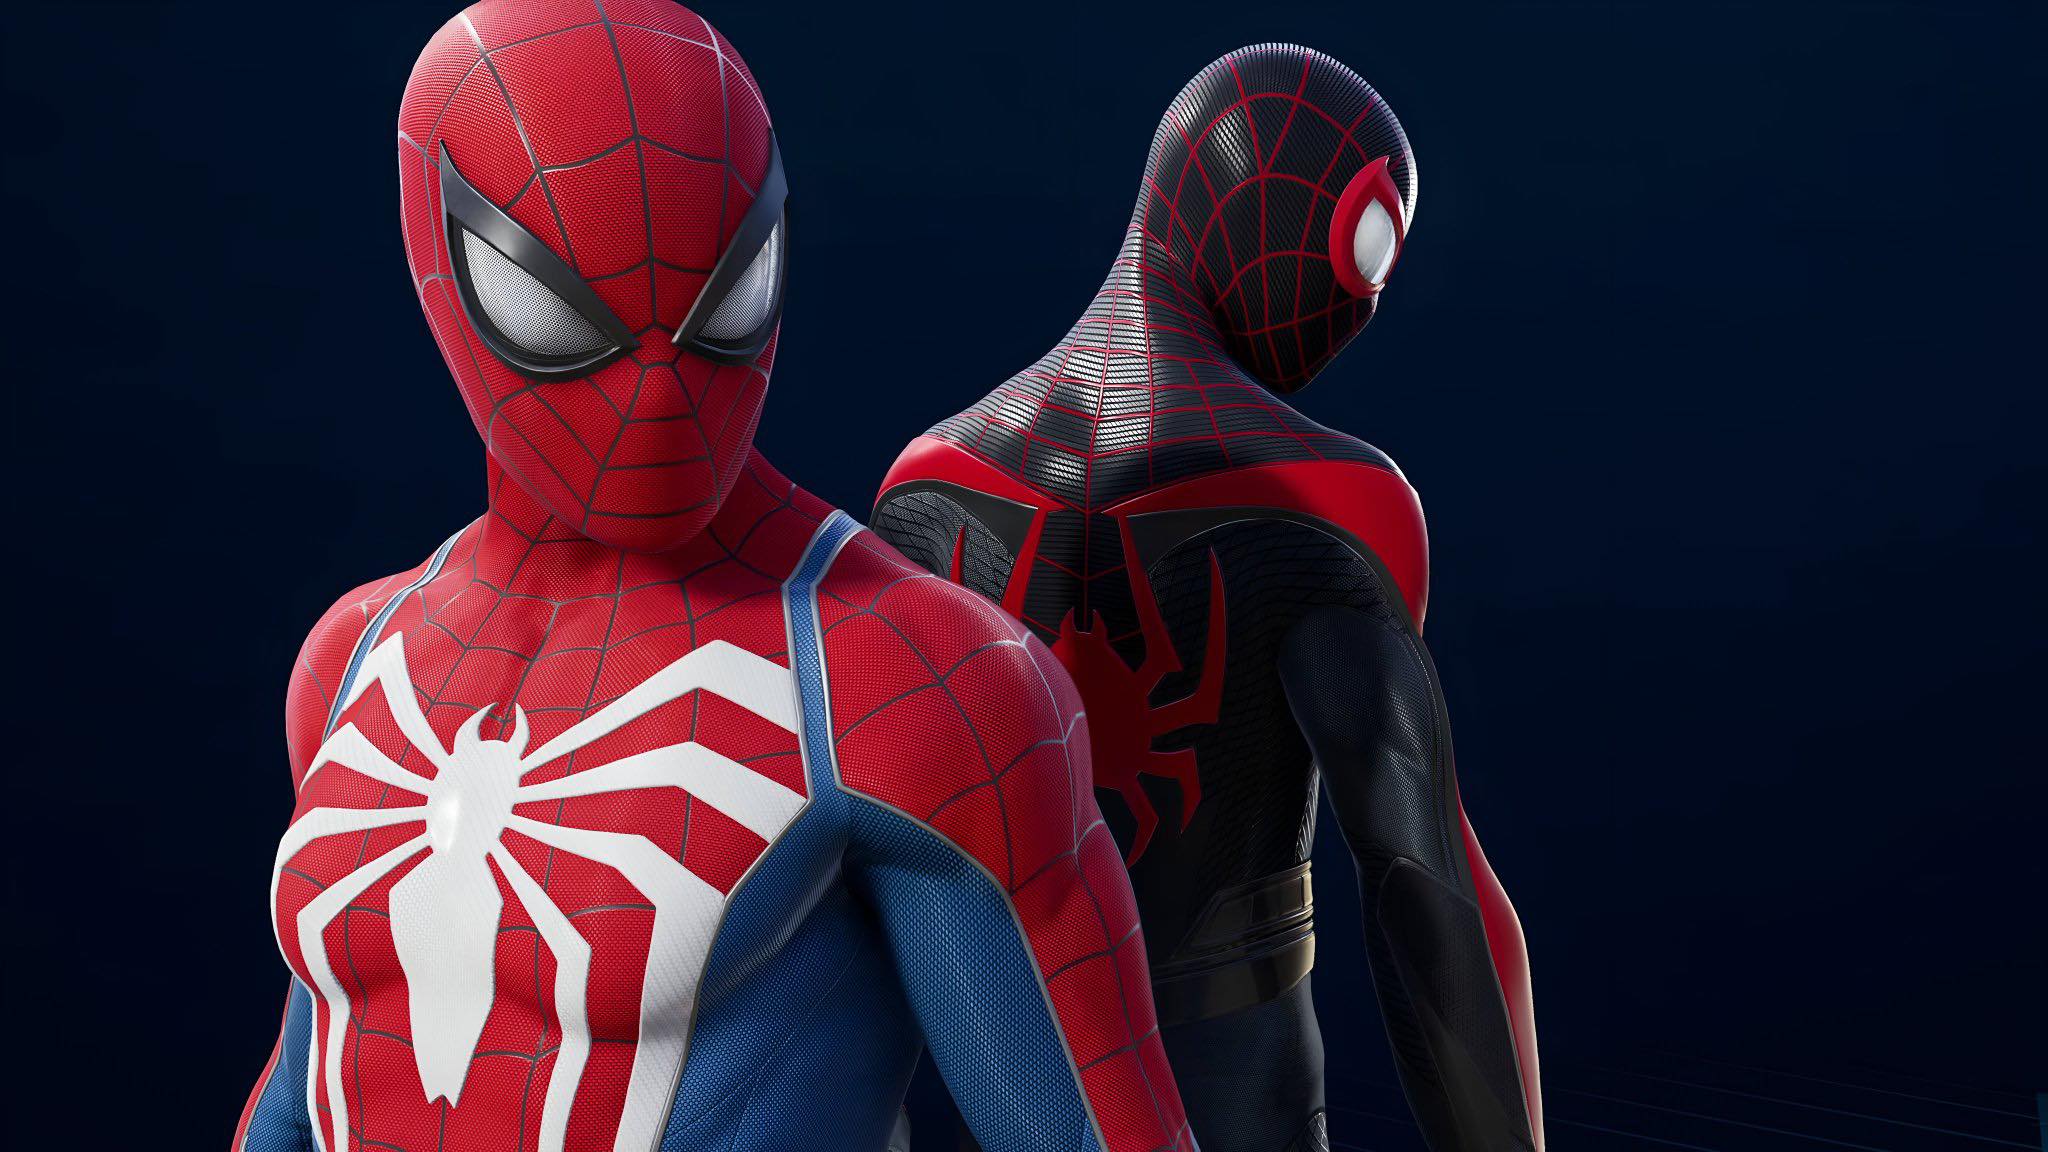 Marvel's Spider-Man 2 could be released in September 2023: hinted